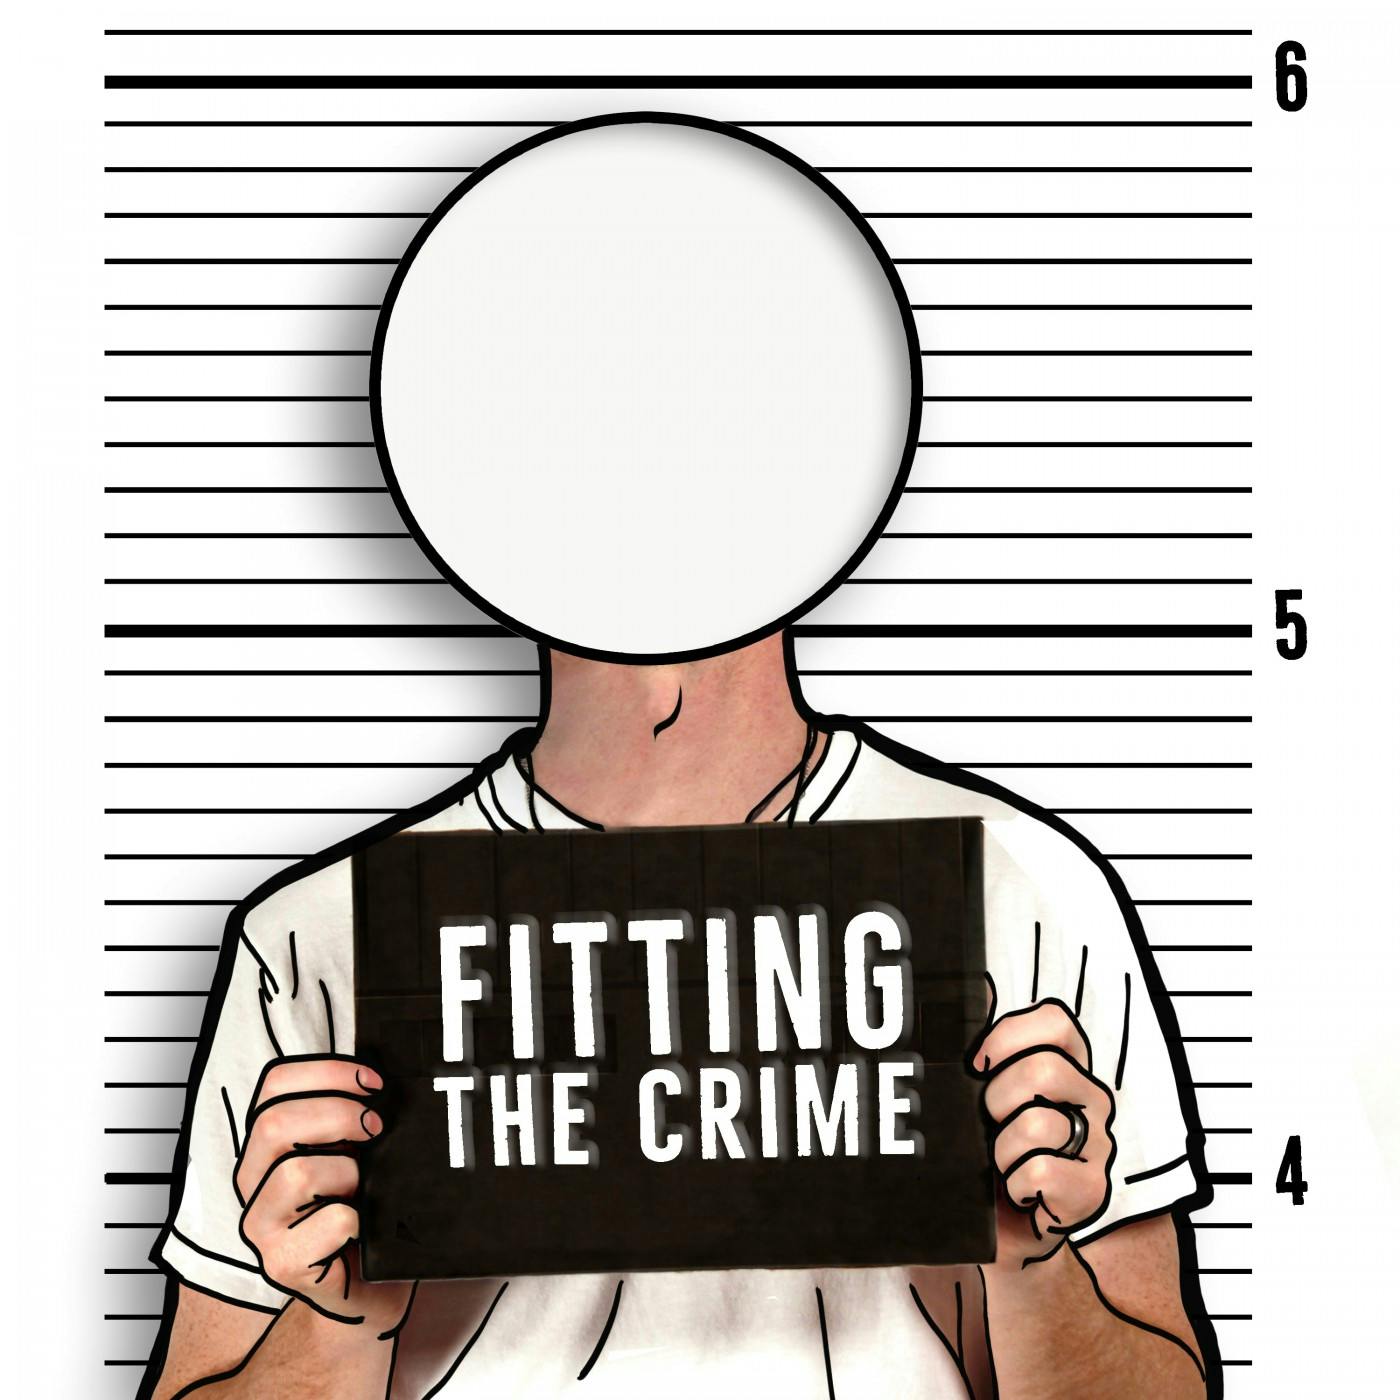 Fitting the Crime Part 2 - Testing Truth